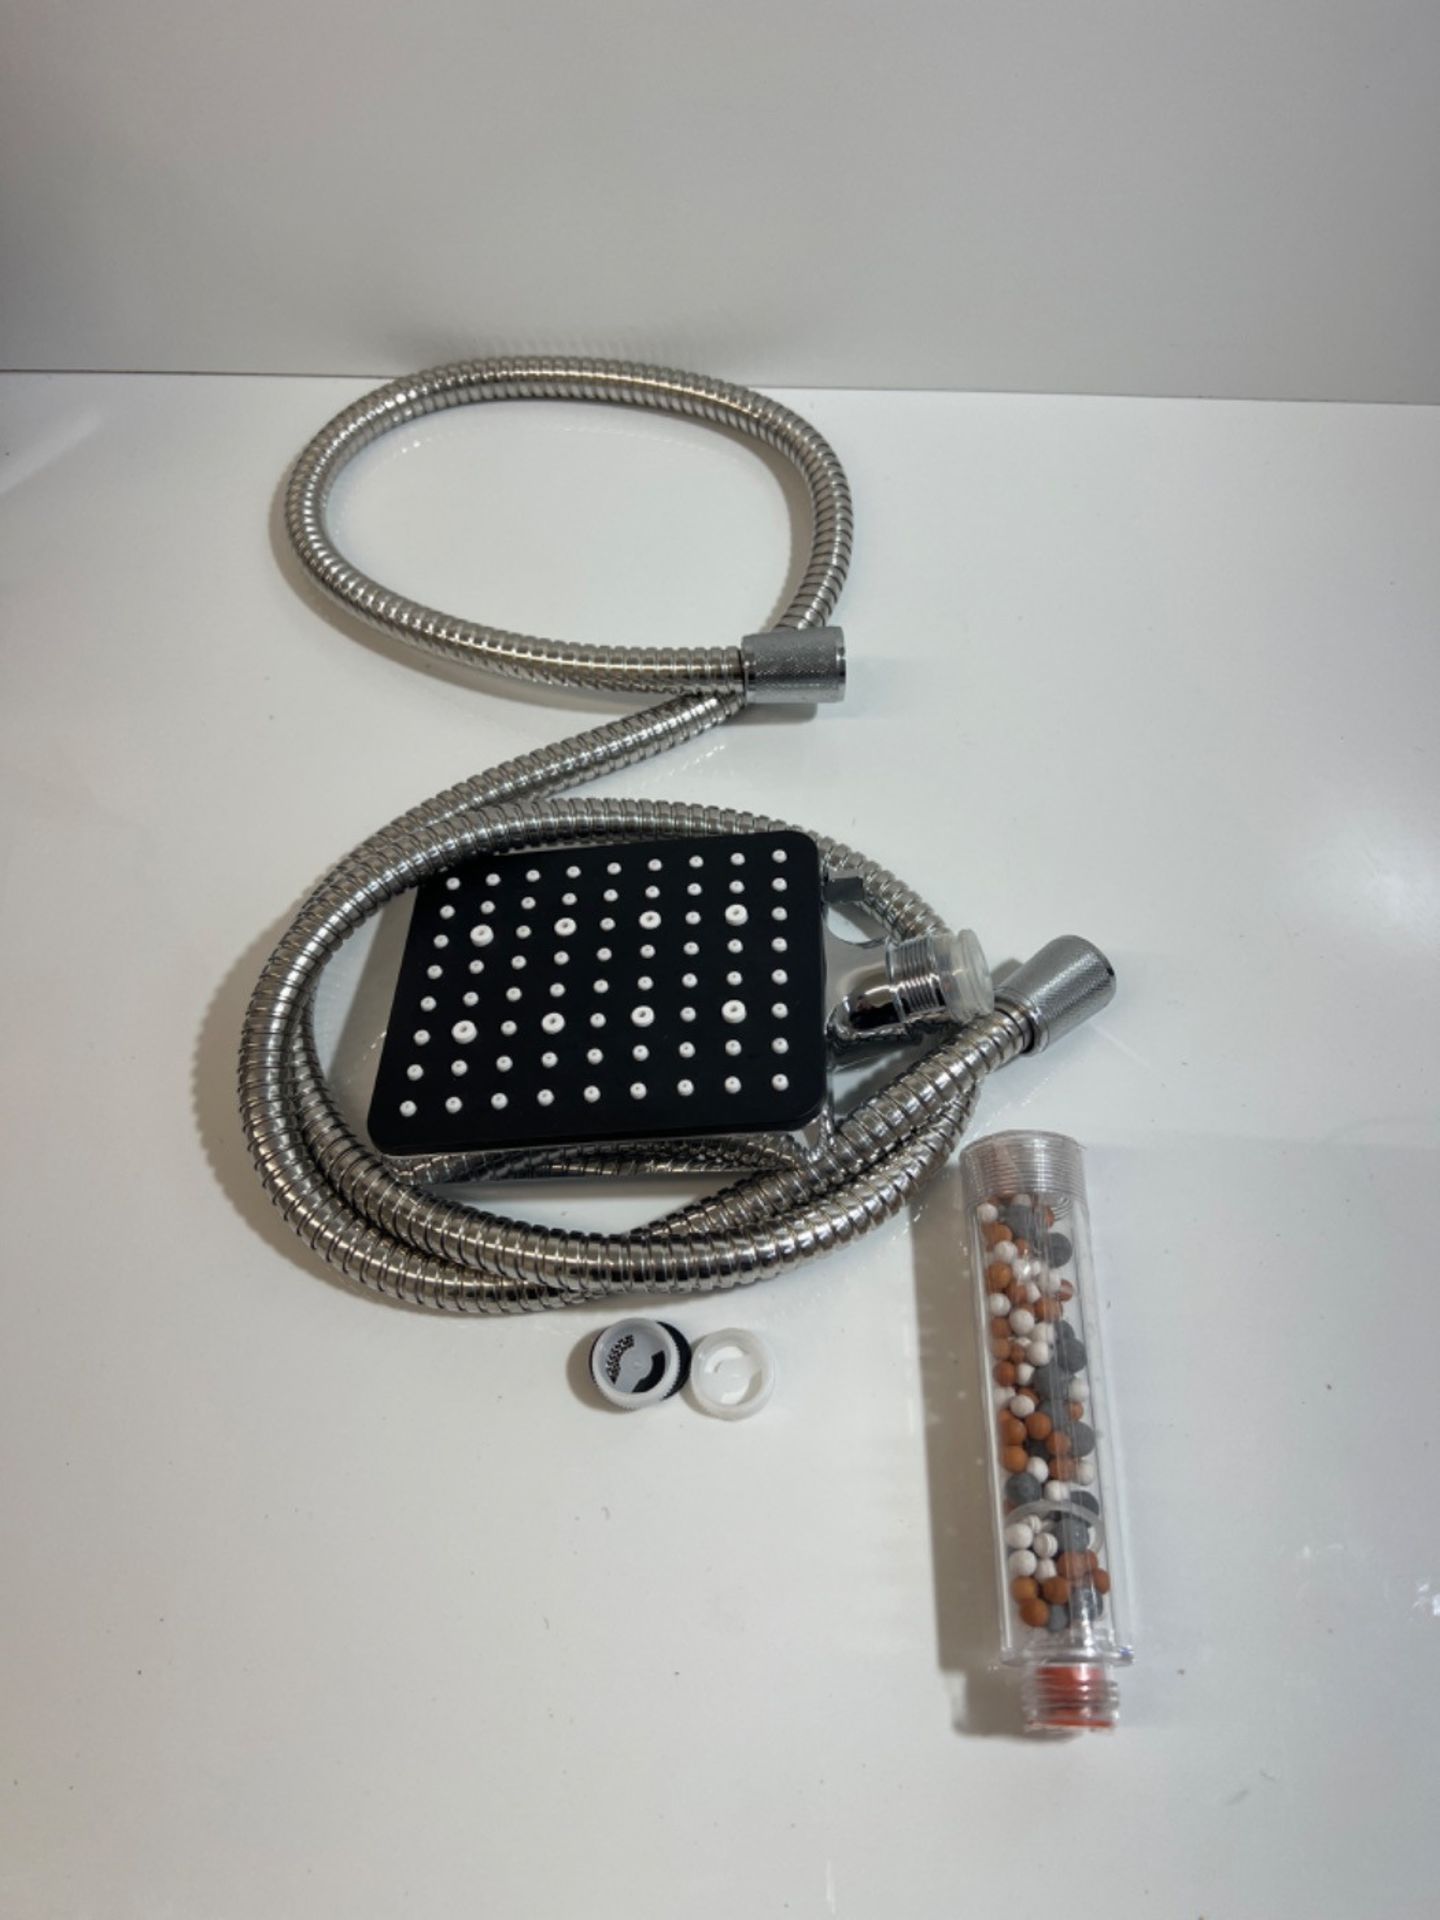 Shower Head and Hose 1.6M with Filter - YEAUPE PRO Square High Pressure Shower Heads and Hose with  - Image 2 of 3